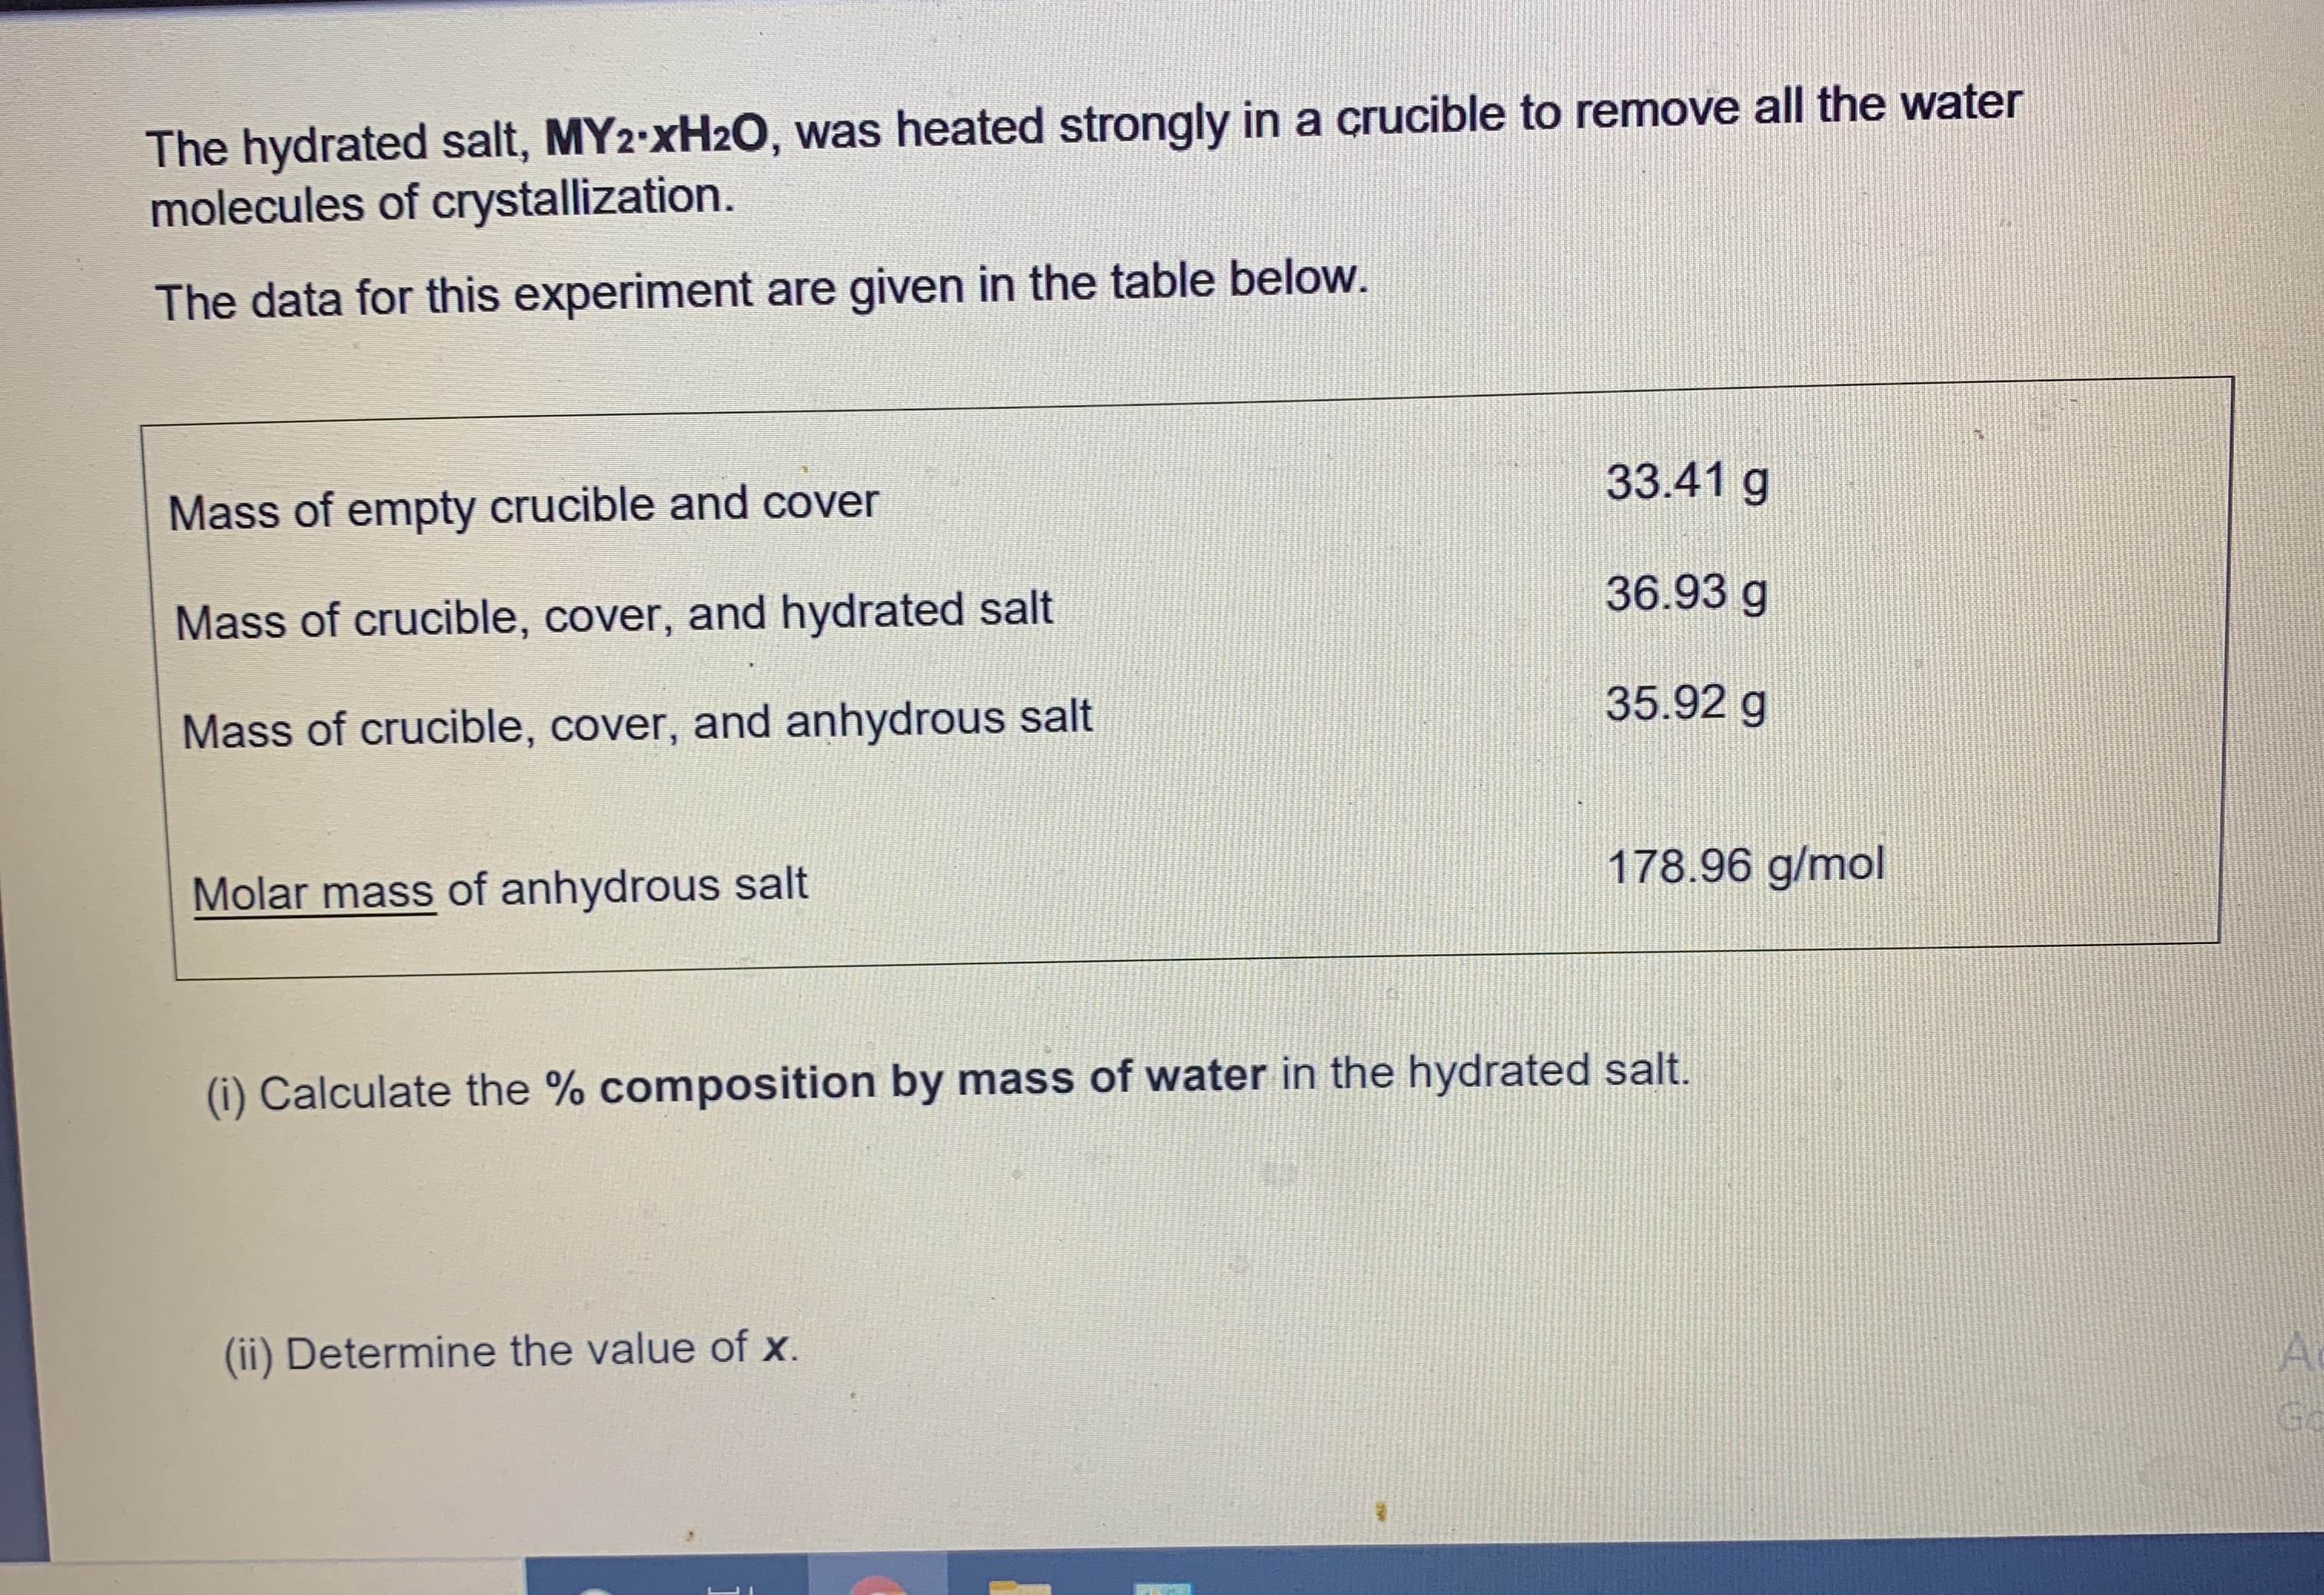 (i) Calculate the % composition by mass of water in the hydrated salt.
(ii) Determine the value of x.
